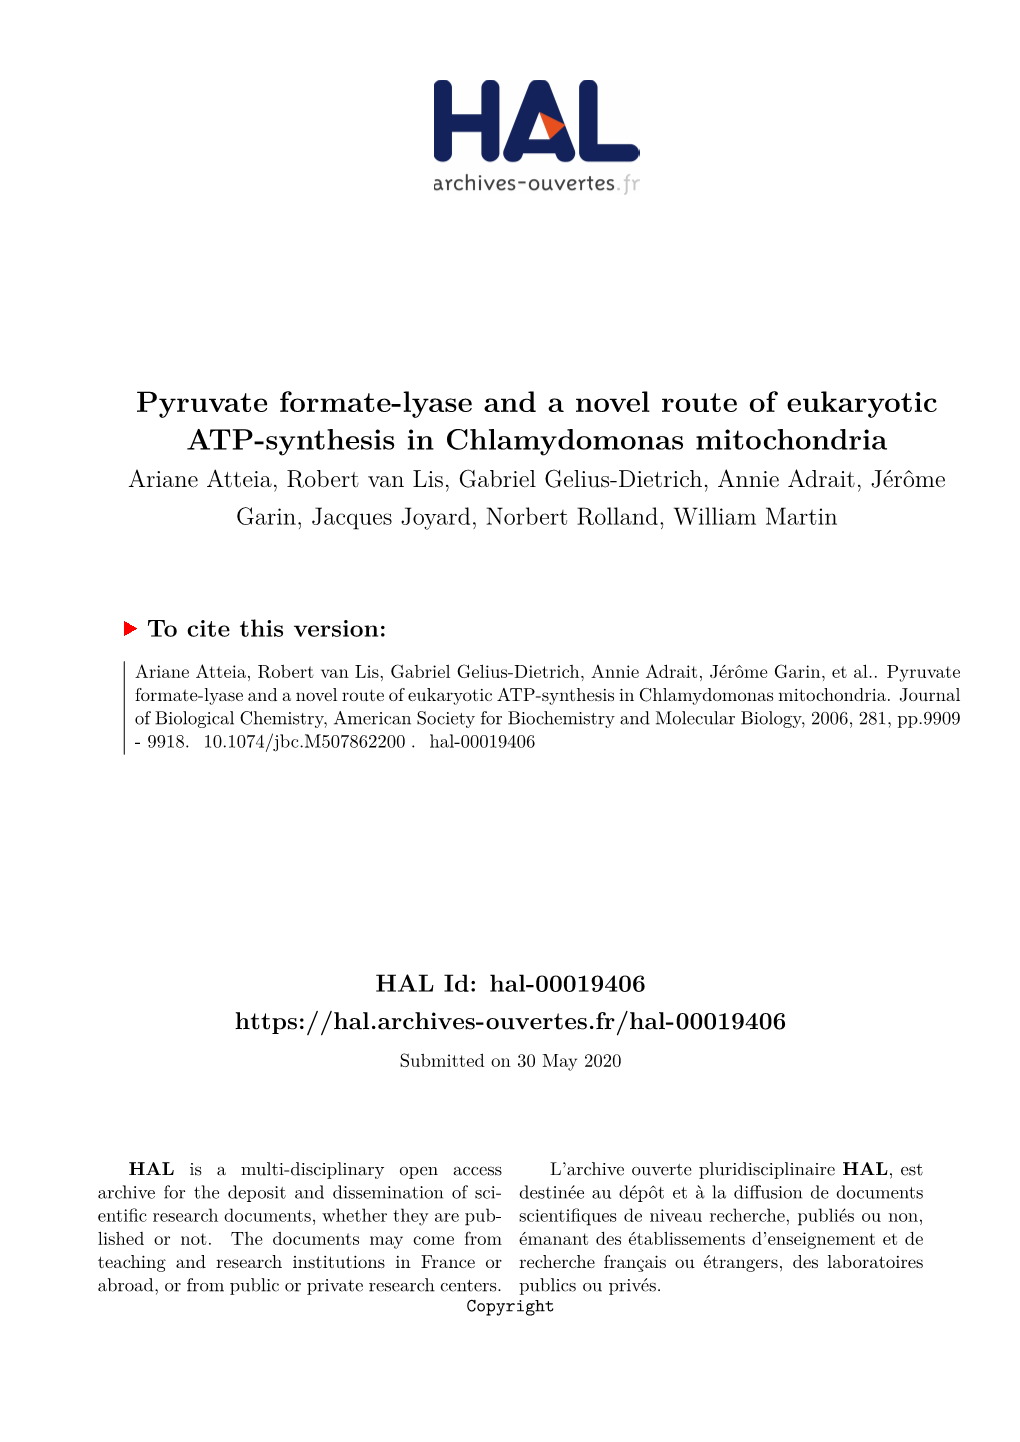 Pyruvate Formate-Lyase and a Novel Route of Eukaryotic ATP-Synthesis In